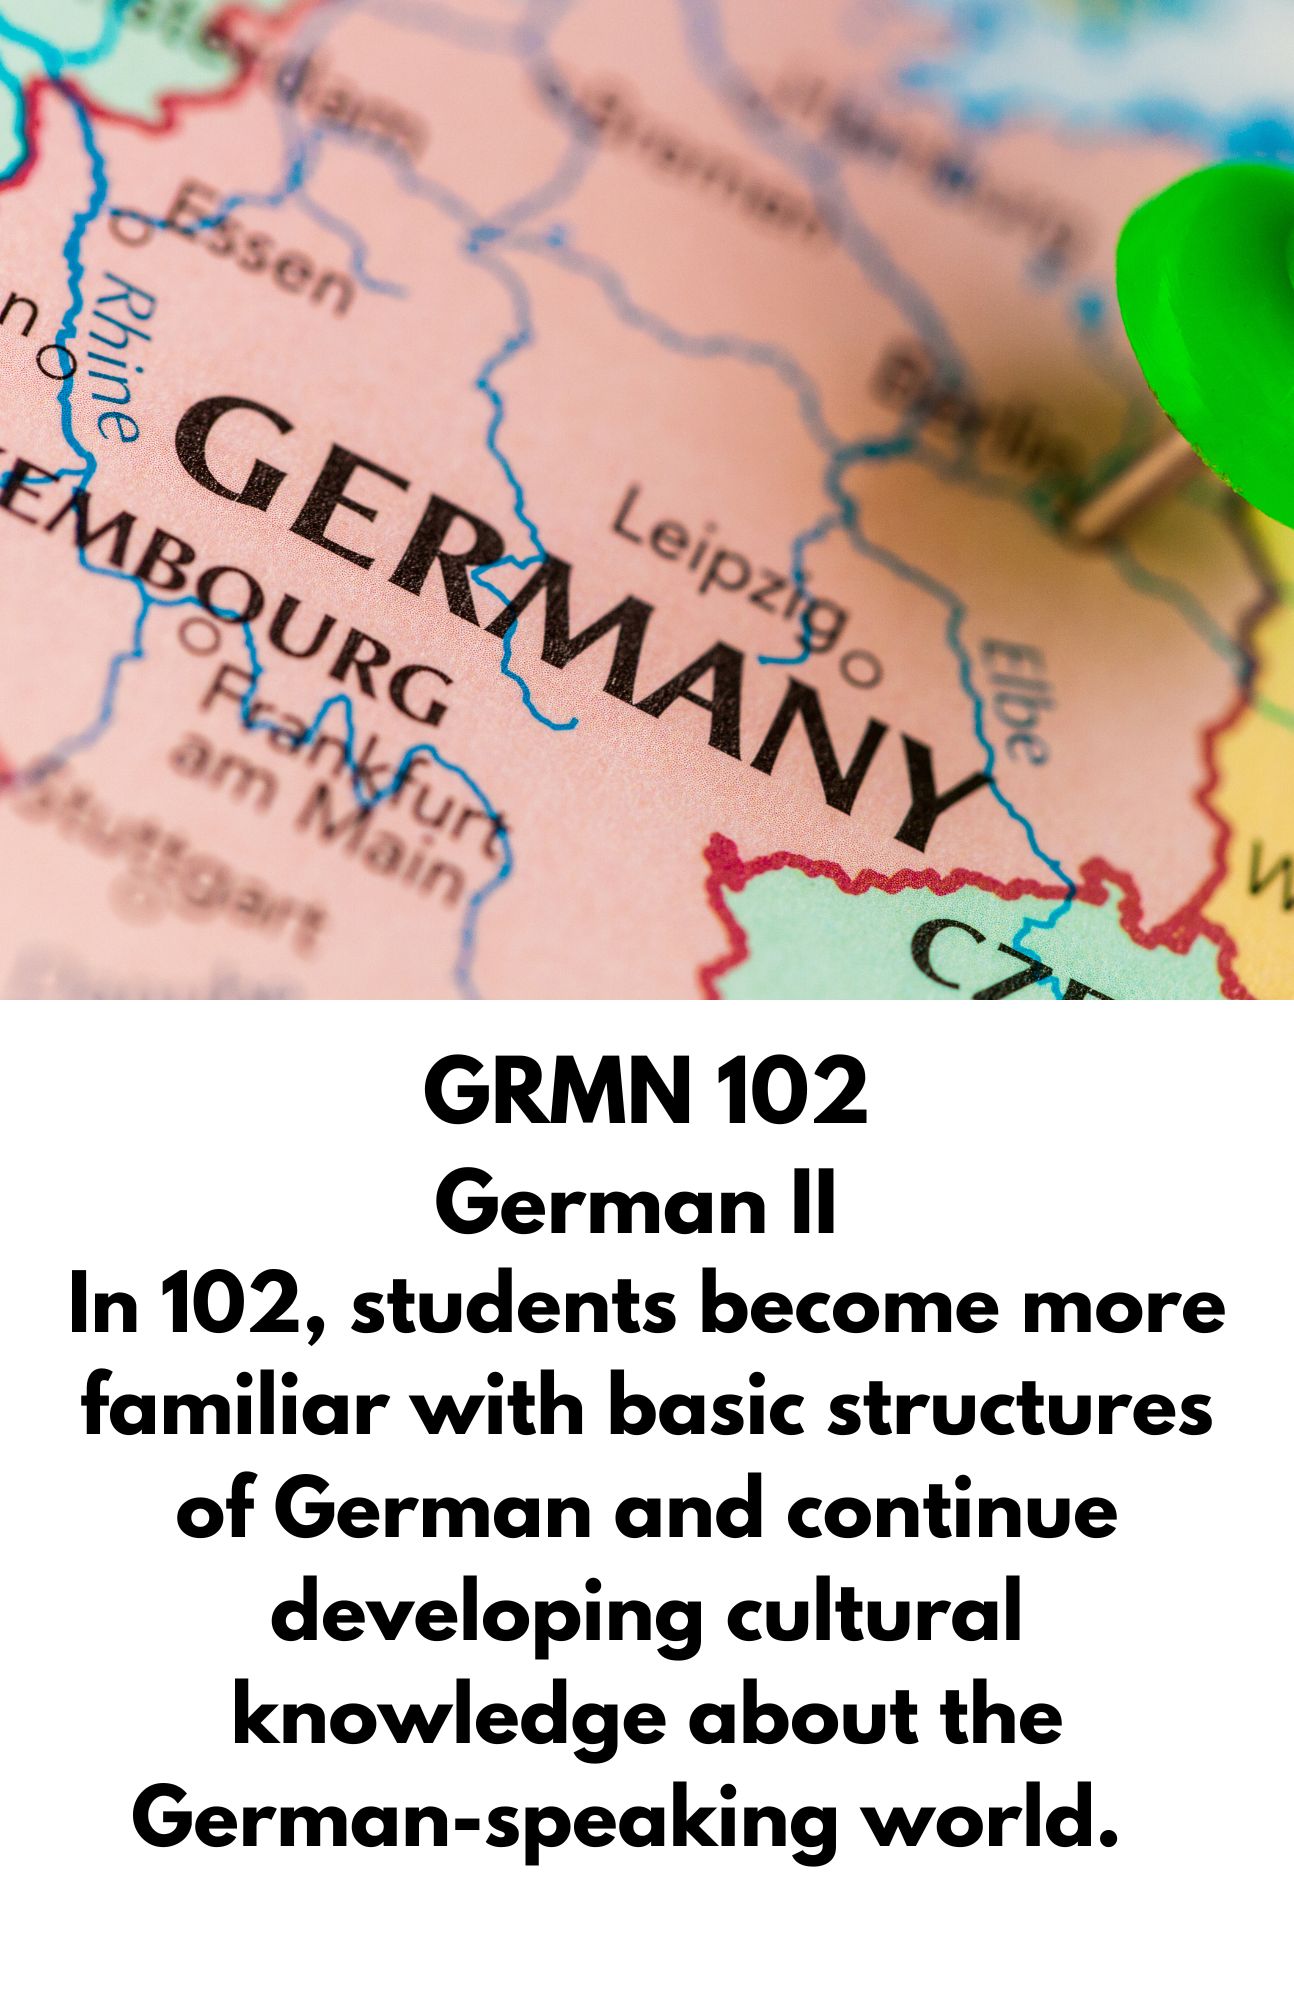 GRMN 102 German II. In 102, students become more familiar with basic structures of German and continue developing cultural knowledge about the German-speaking world.